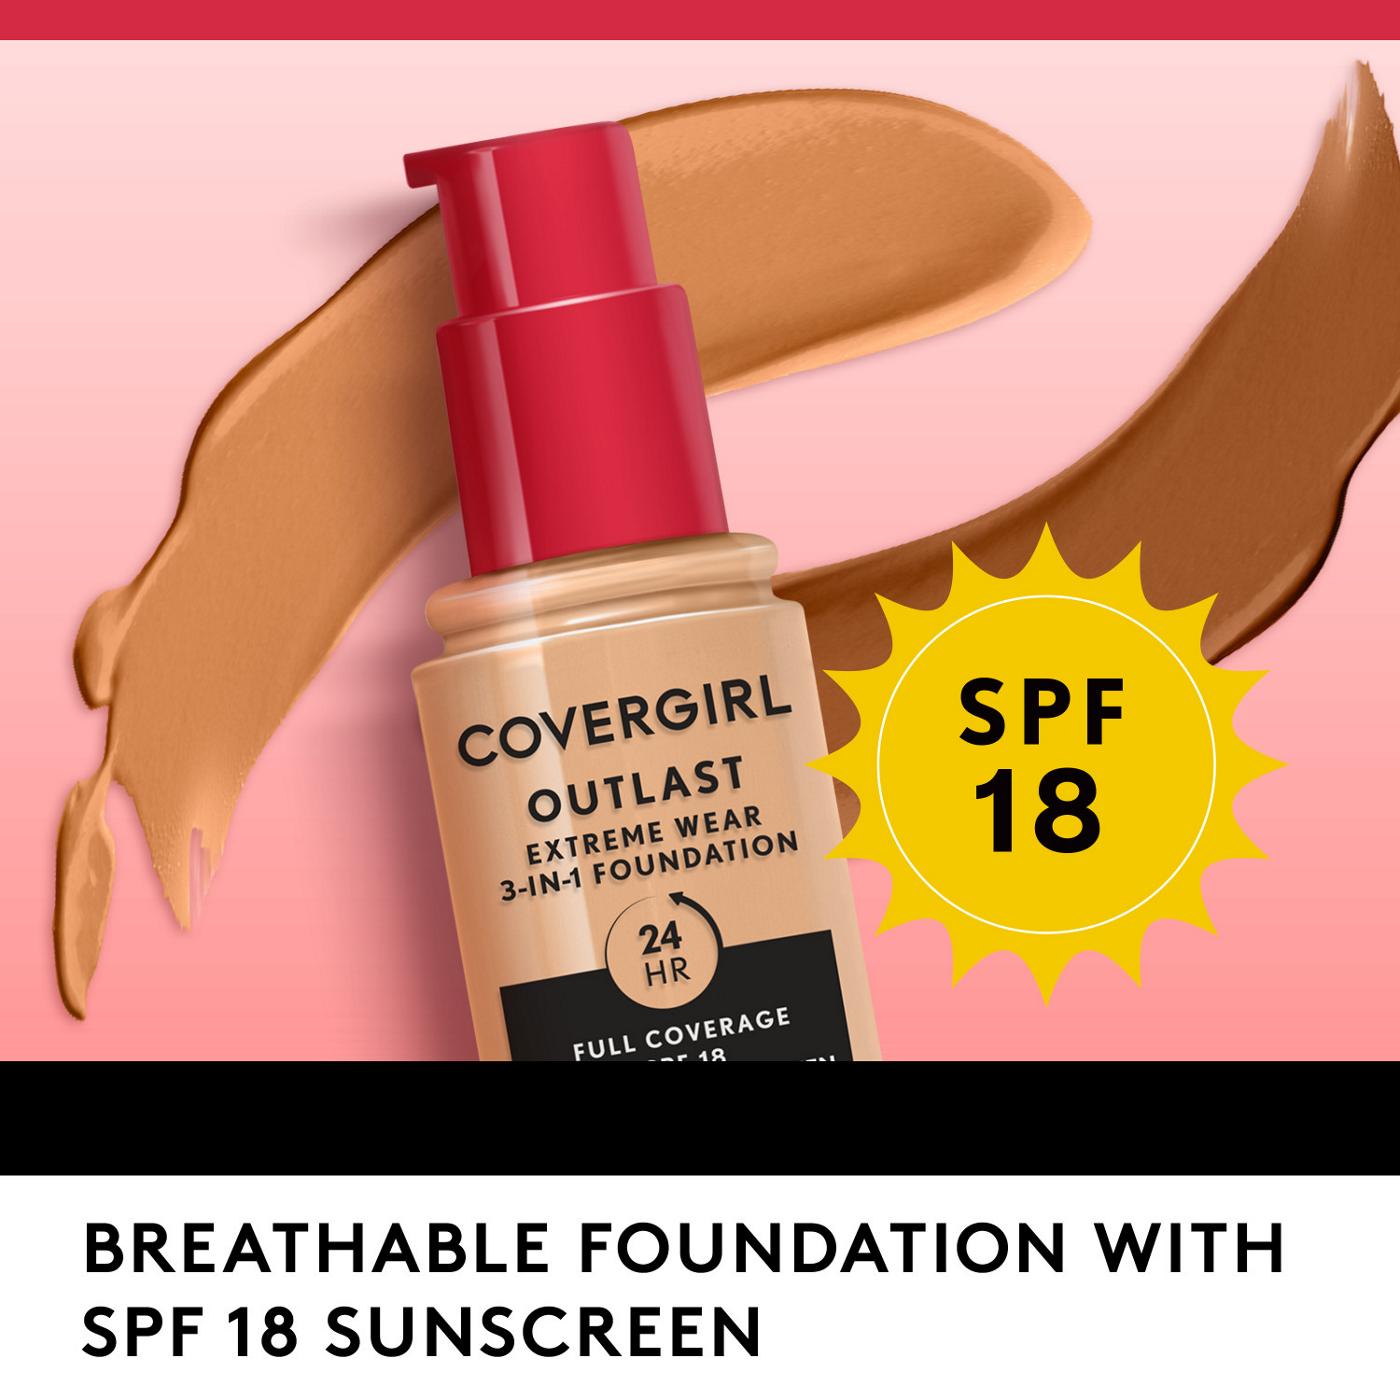 Covergirl Outlast Extreme Wear Liquid Foundation 817 Golden Natural; image 5 of 11